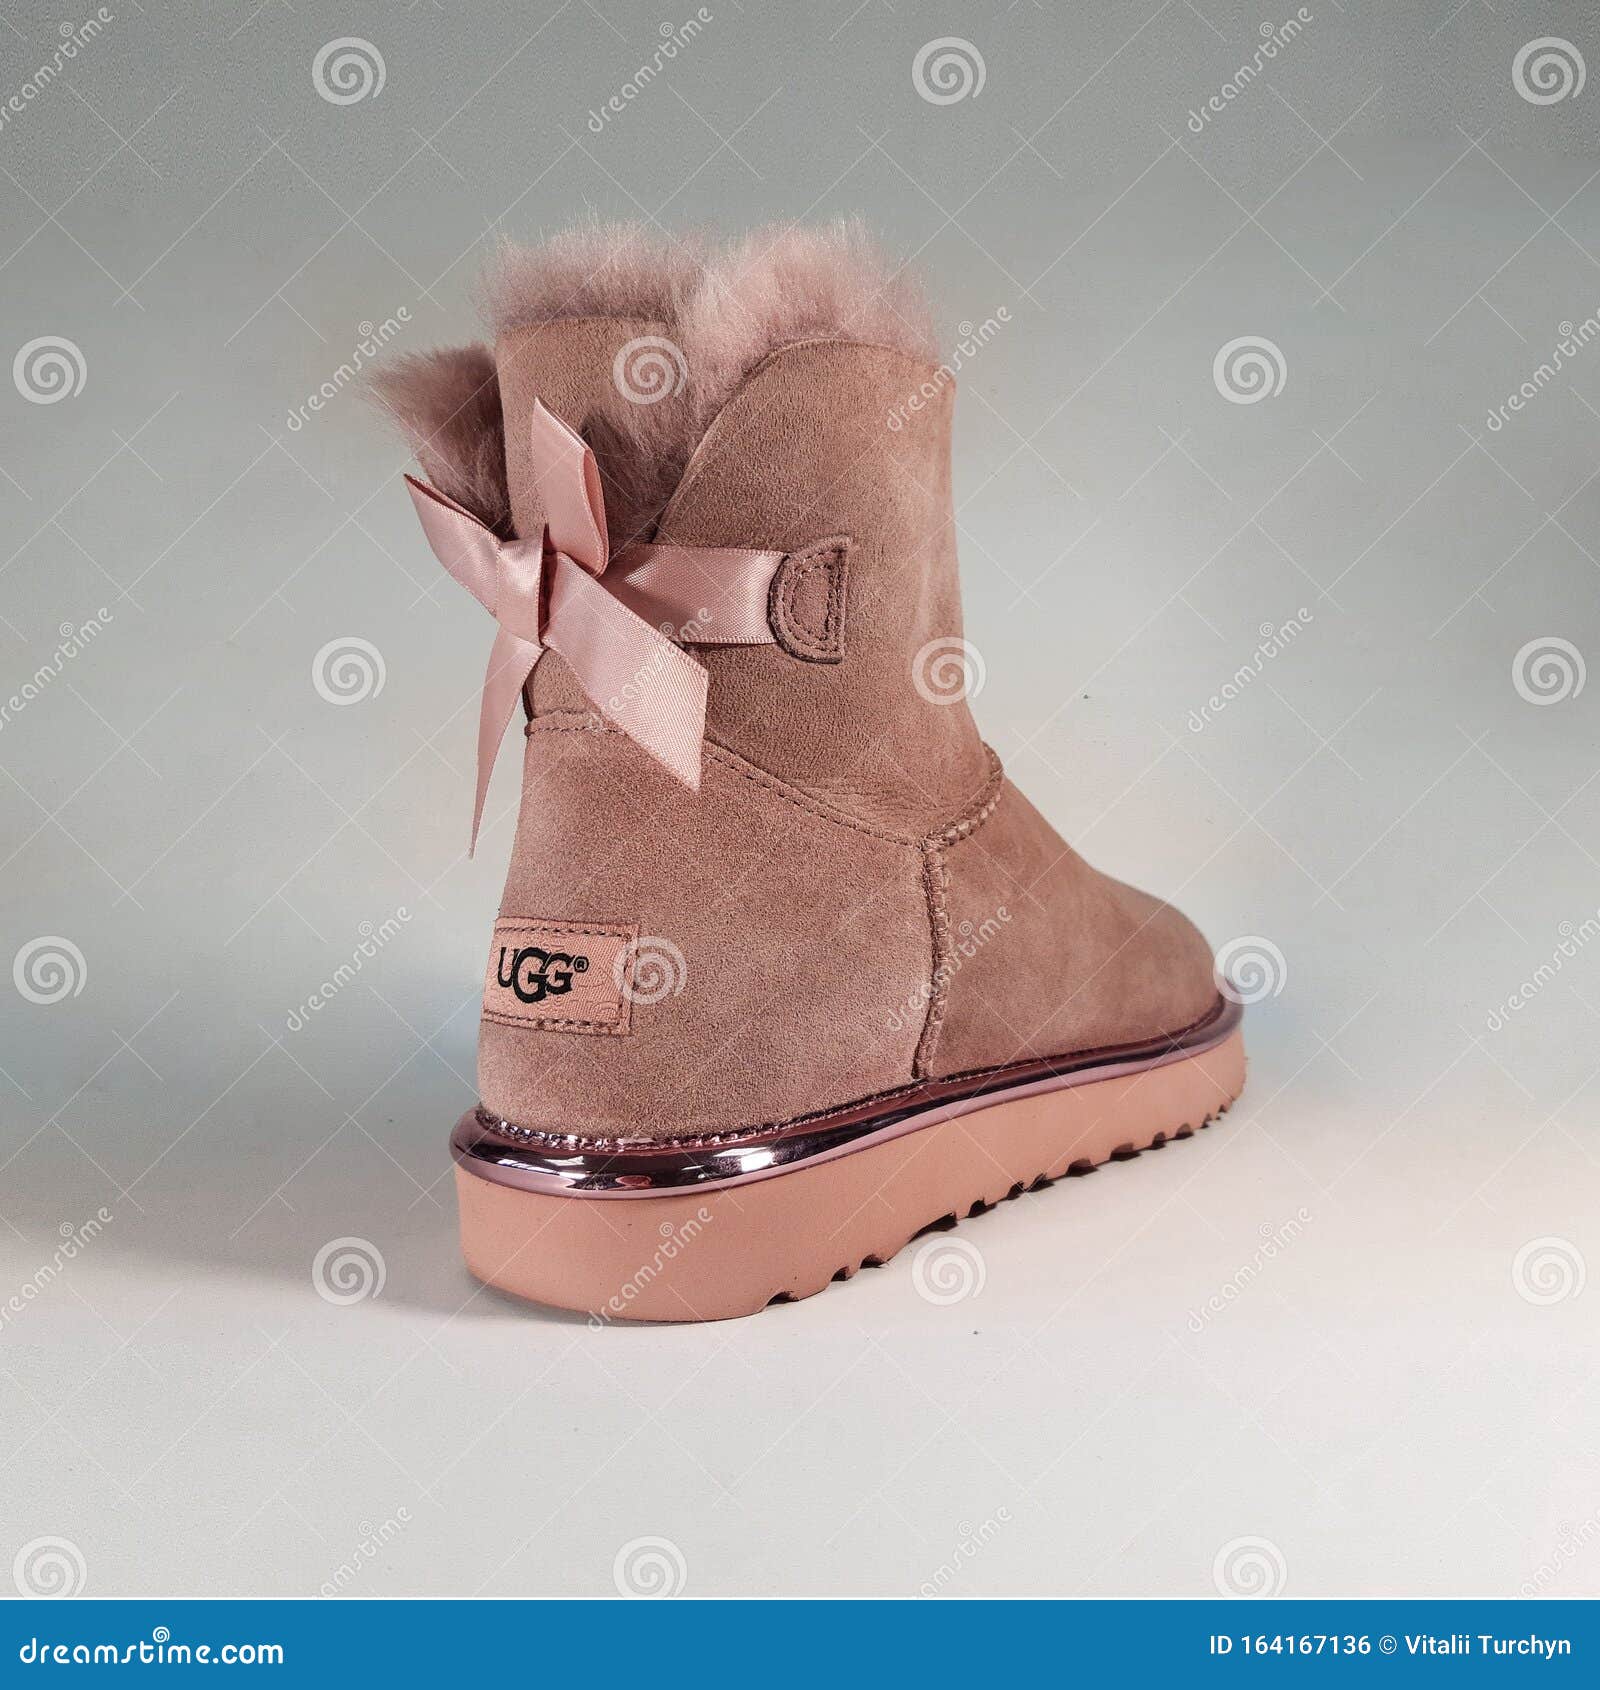 winter shoes ugg